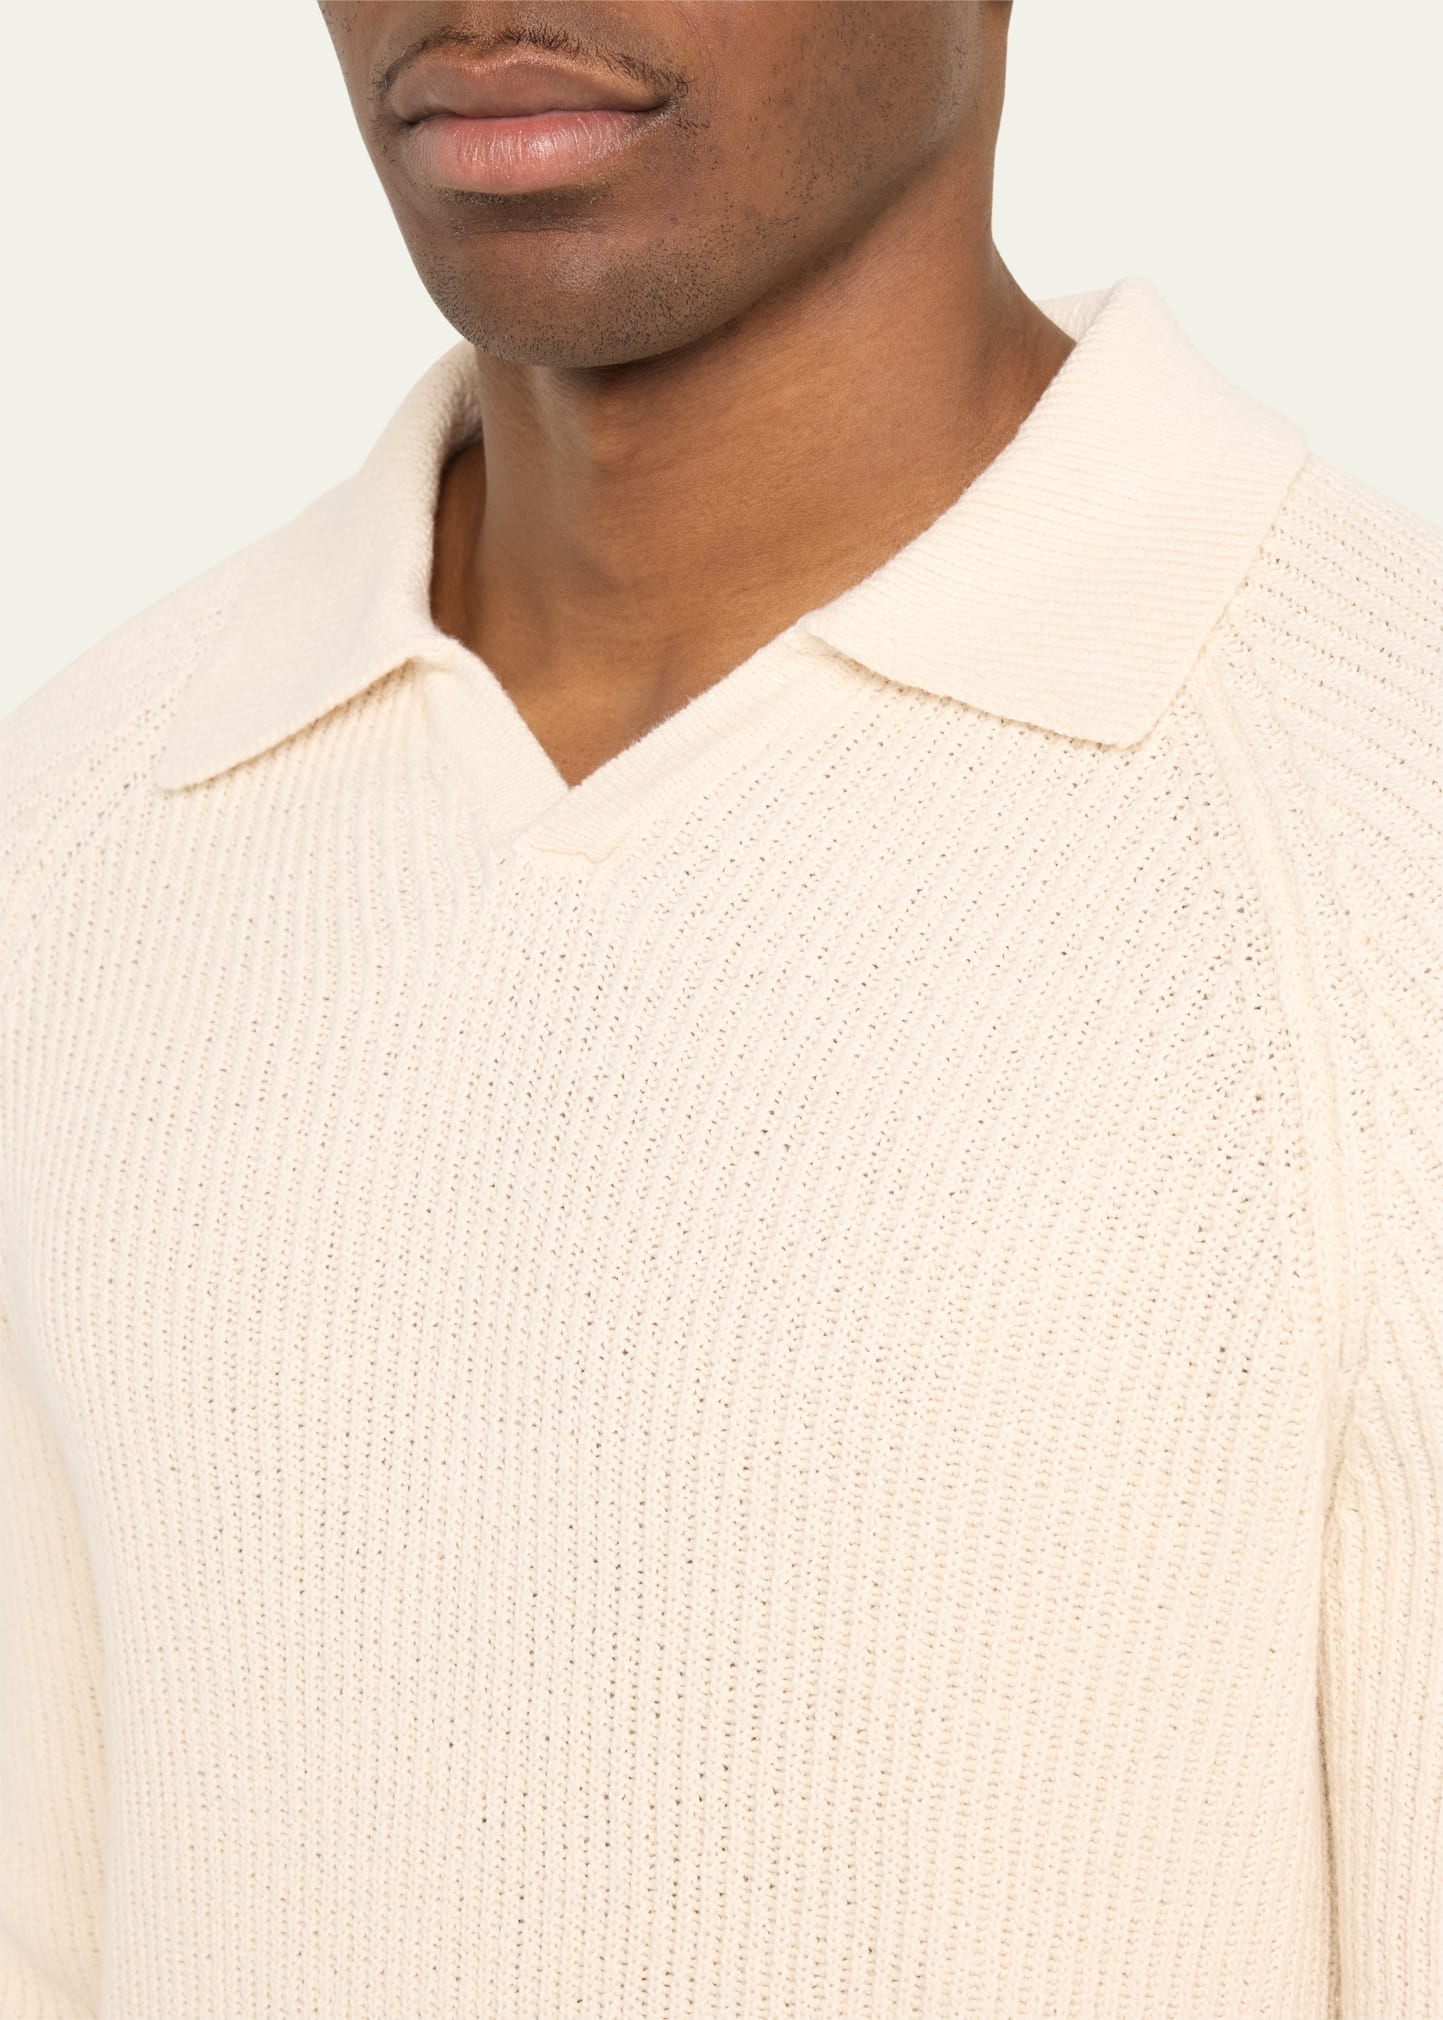 Men's Cotton Ribbed Johnny-Collar Sweater - 5